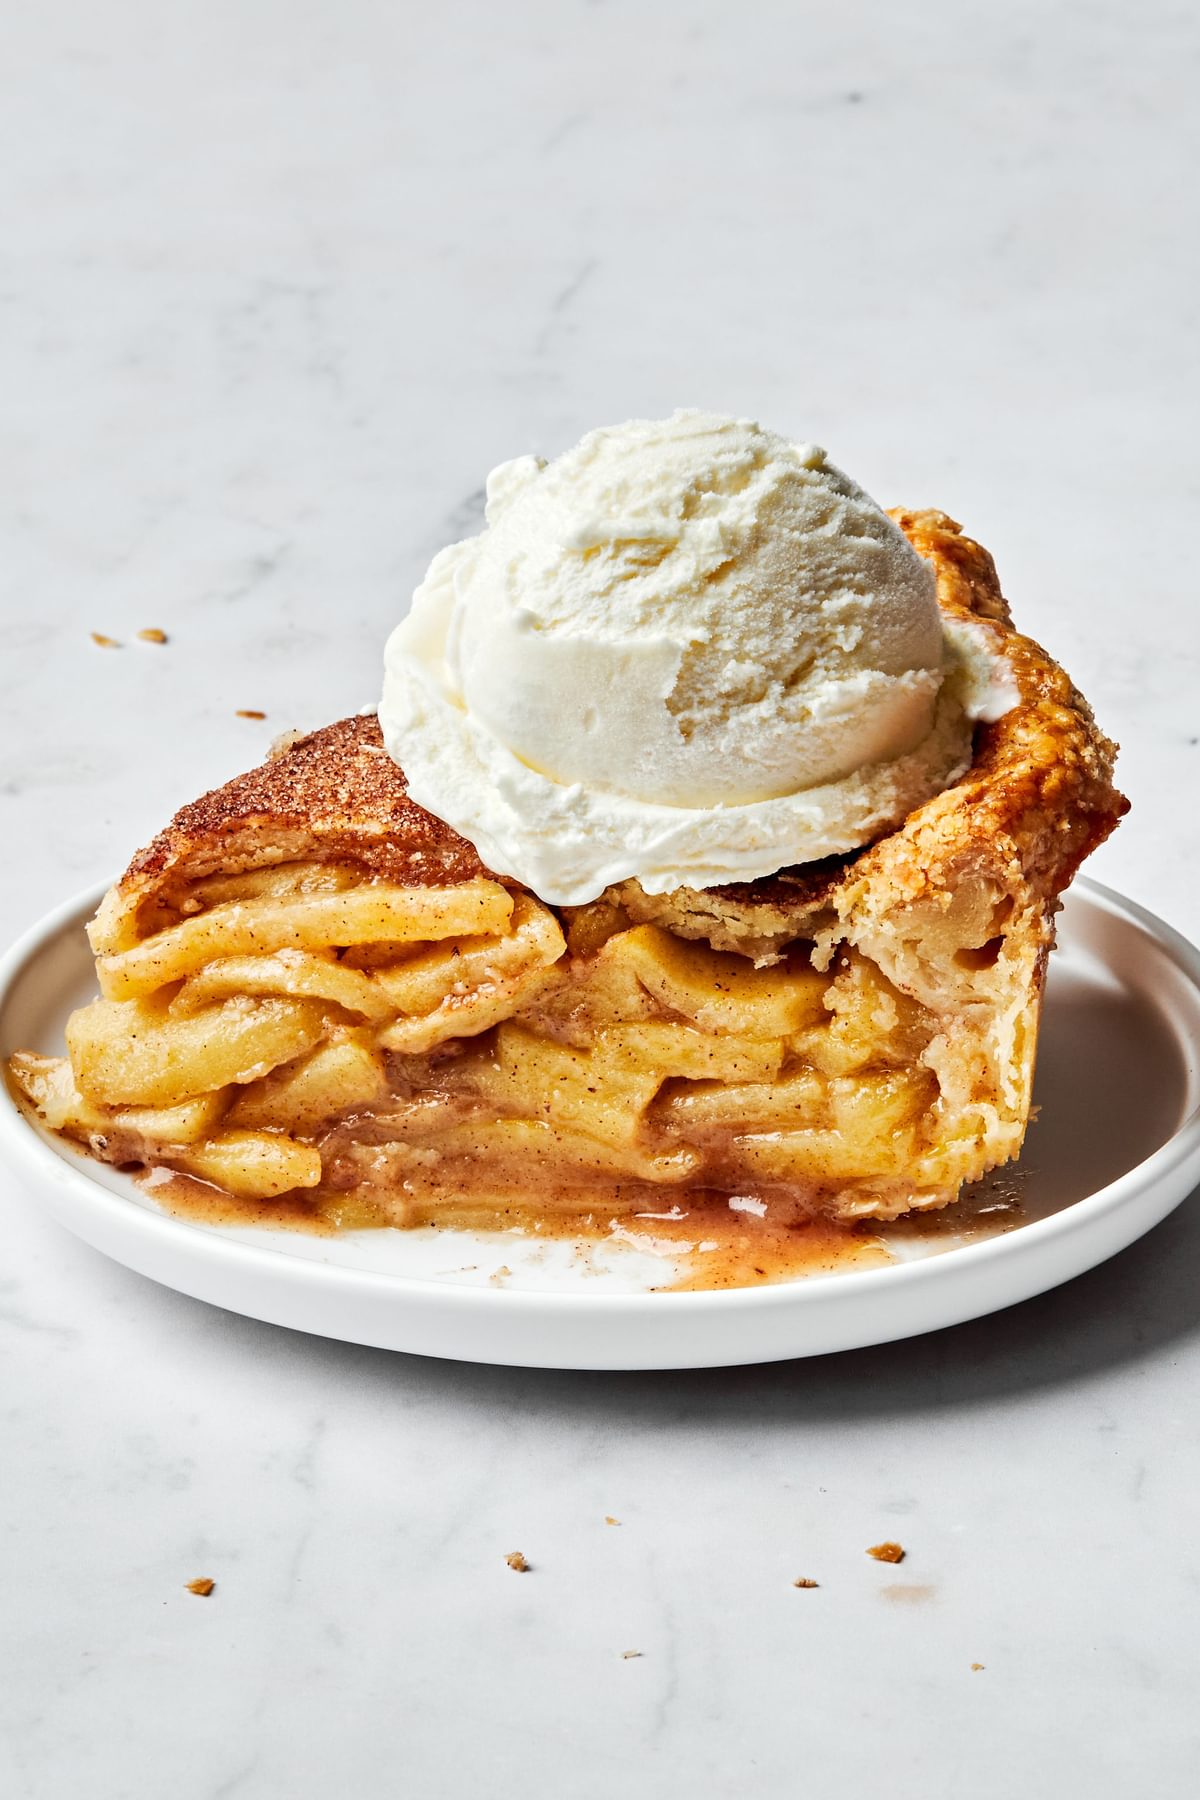 a slice of homemade apple pie topped with vanilla ice cream. Pie is seasoned with brown sugar, cinnamon and nutmeg.